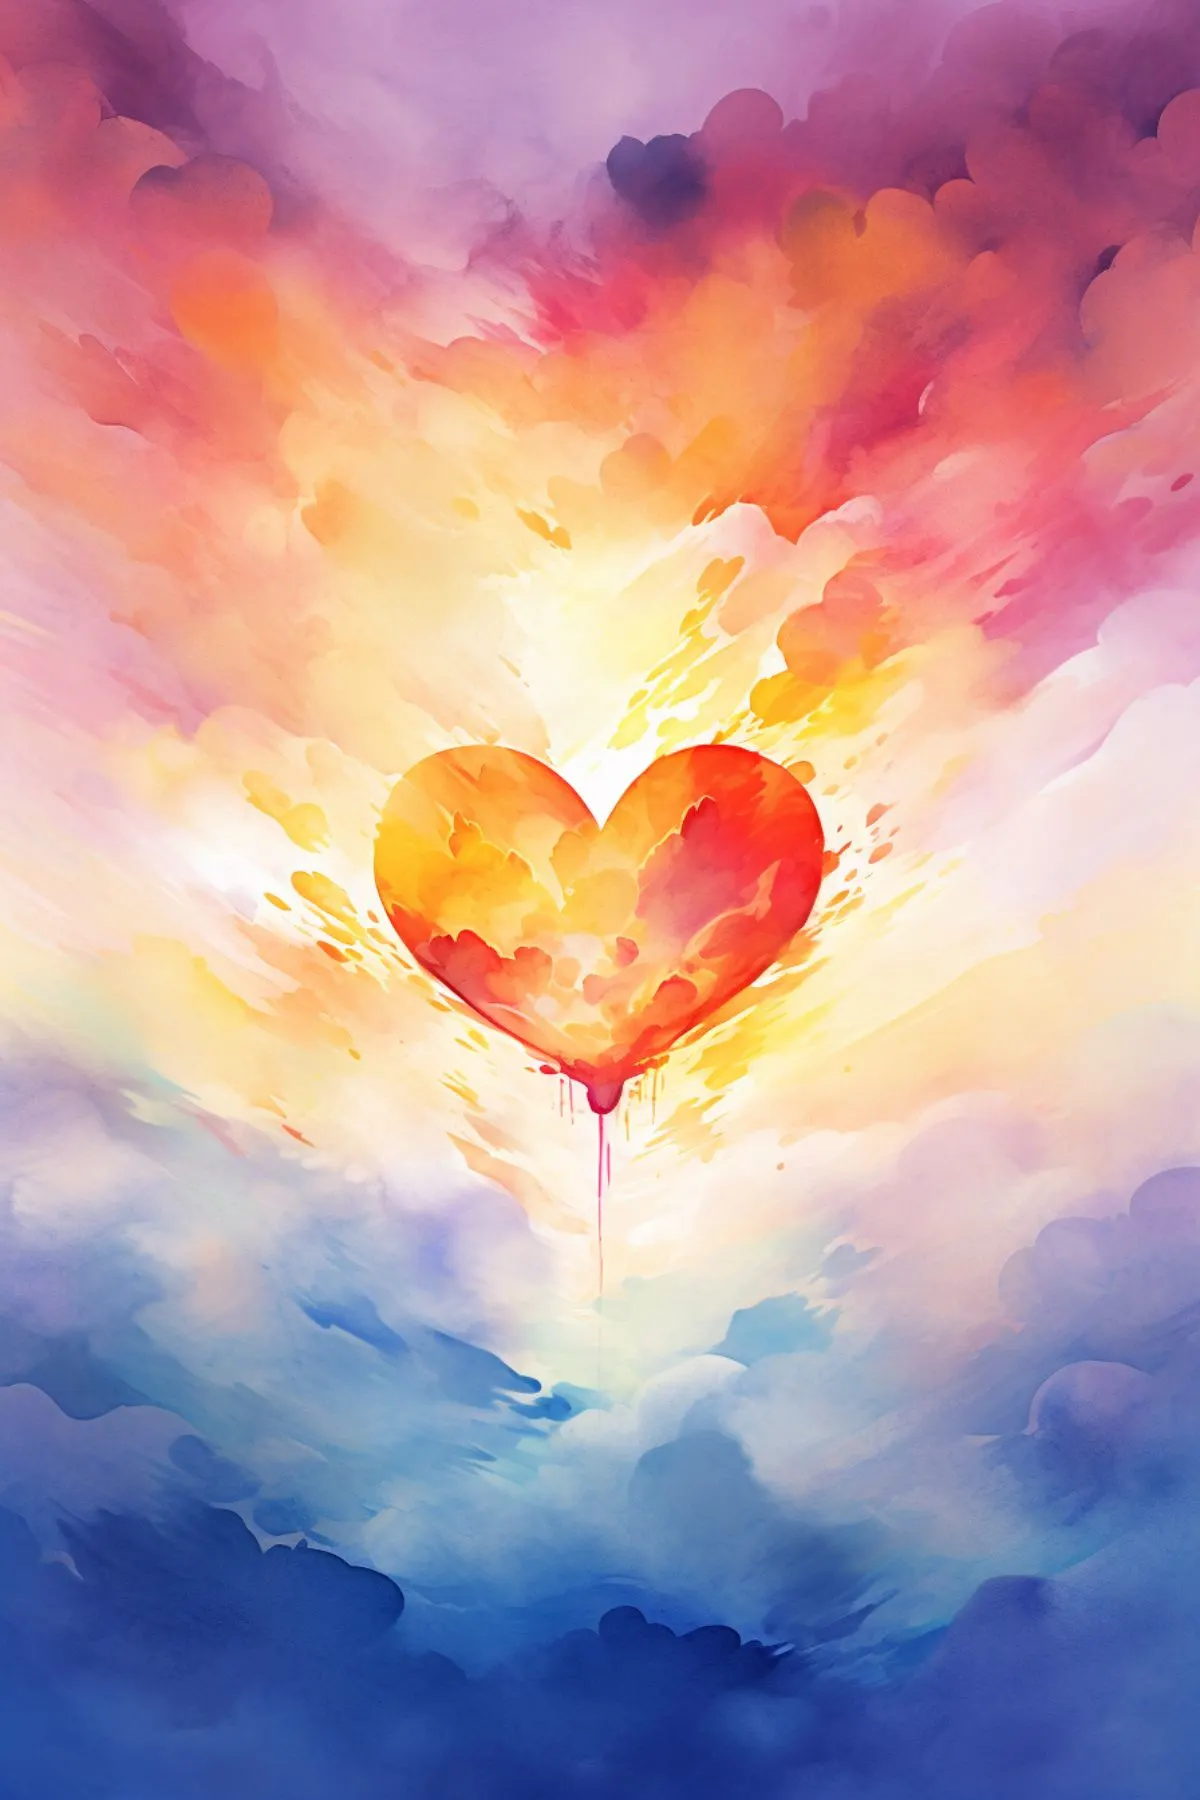 Cover image for prayers for relationships, features a colorful heart hovering over a watercolor background